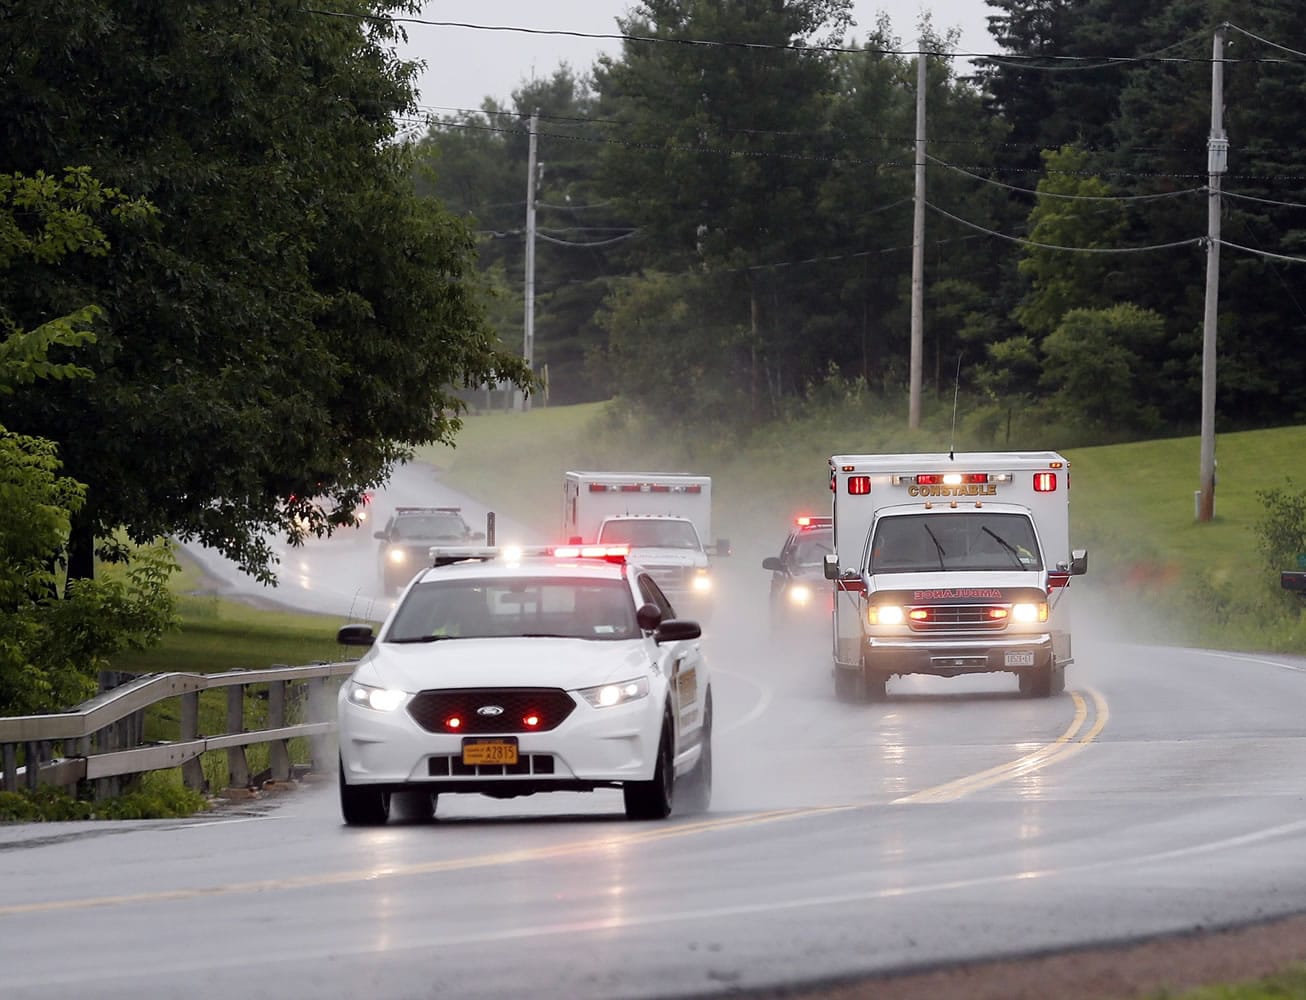 Police escort ambulances from an area where law enforcement officers were searching for convicted murderer David Sweat, one of two convicted murderers who broke out of a maximum-security prison near the Canadian border, on Sunday in Constable, N.Y.